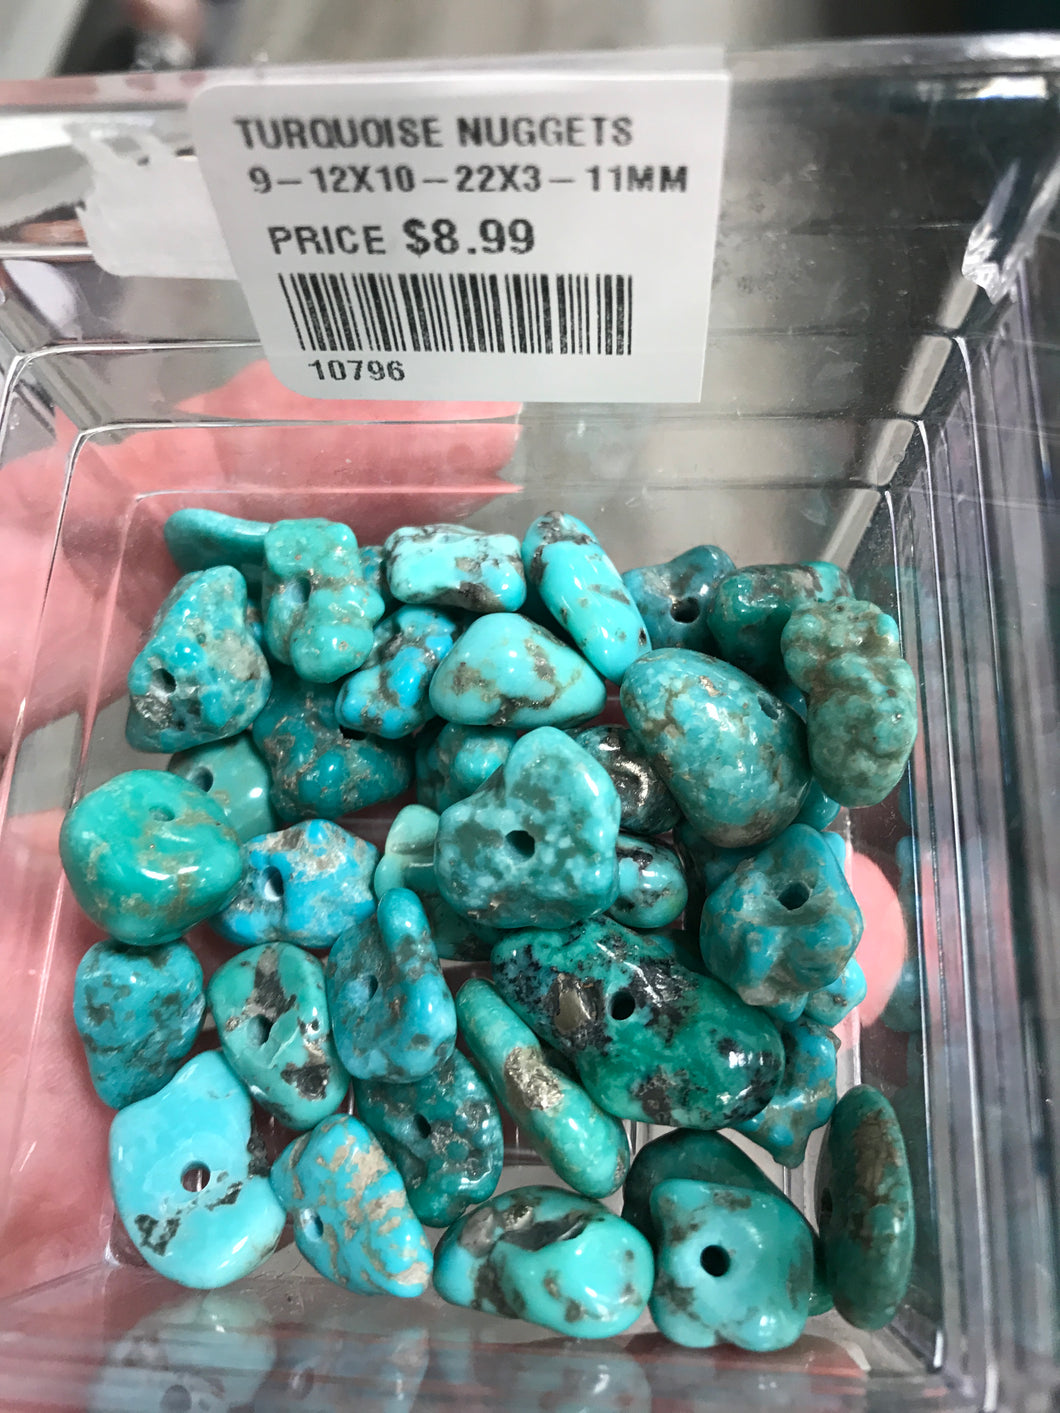 TURQUOISE NUGGETS